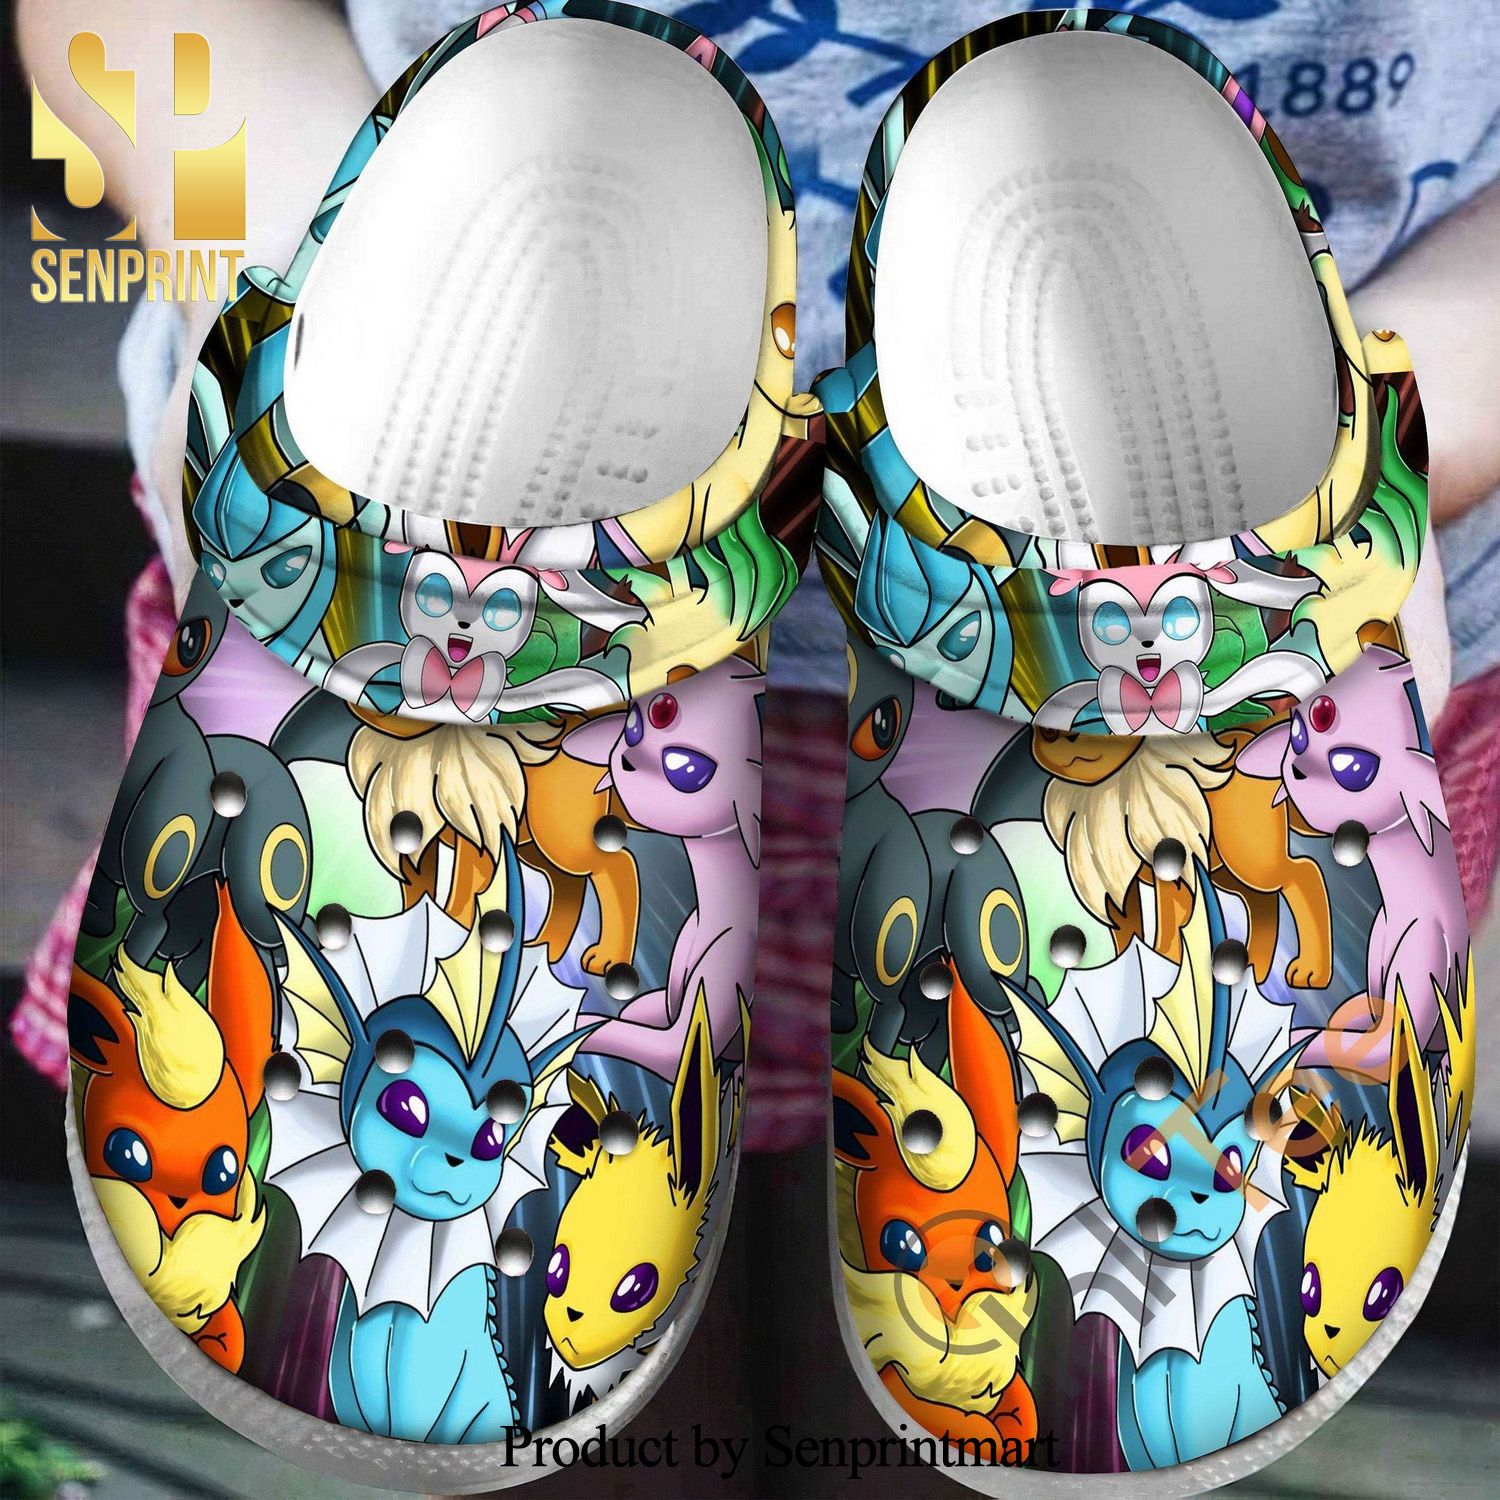 Eevee Collab Pokemon Gift For Lover Full Printed Crocs Crocband In Unisex Adult Shoes